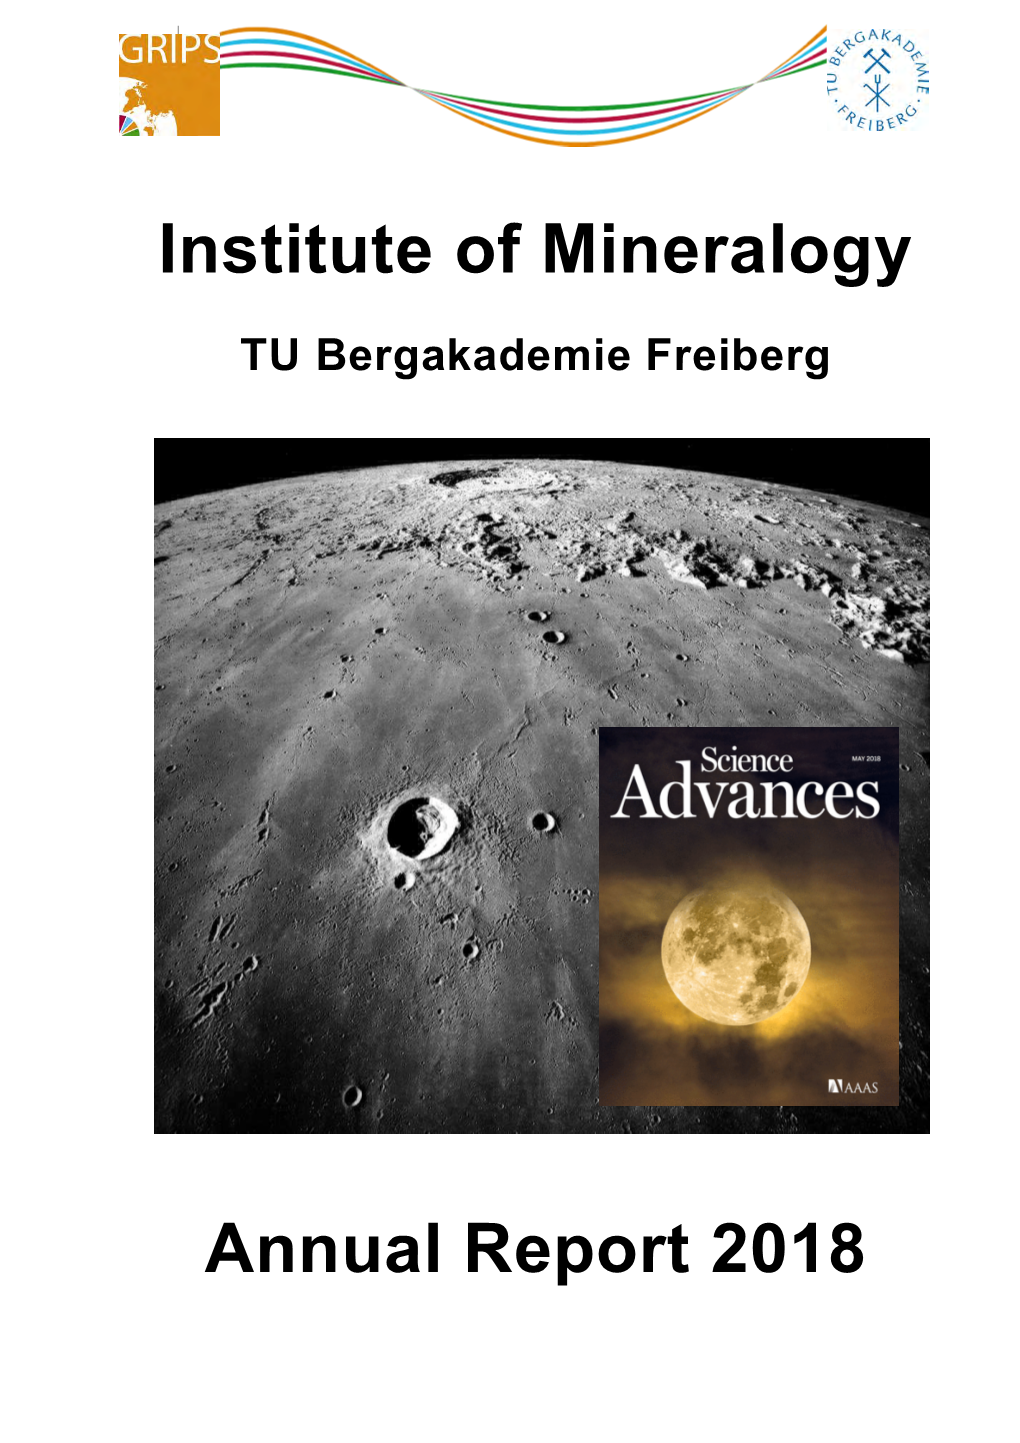 Institute of Mineralogy Annual Report 2018